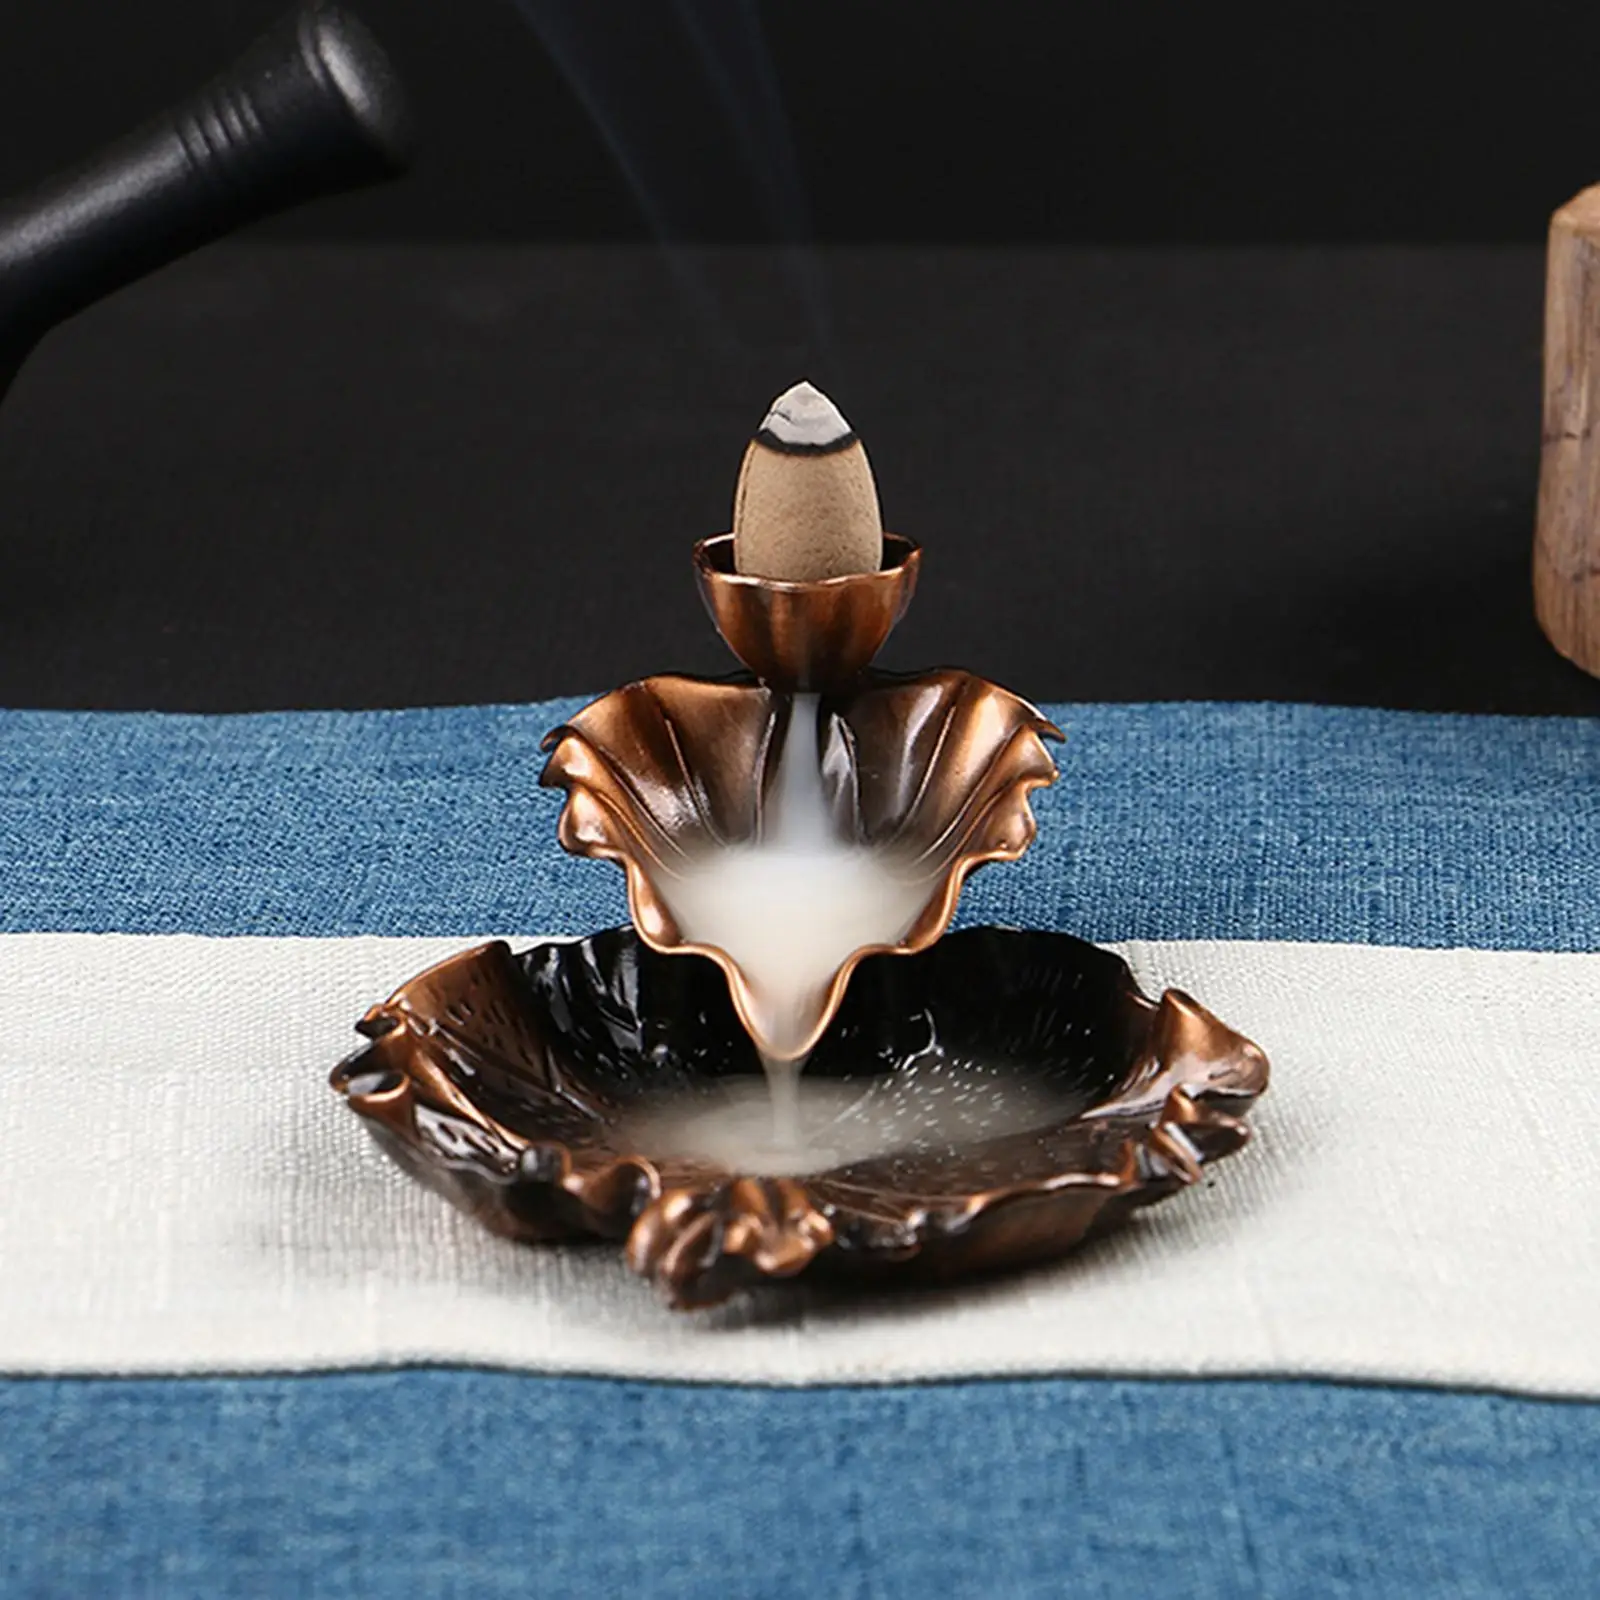 Lotus Backflow Incense Burner Smoke Cone Burner for Relaxation Home Office